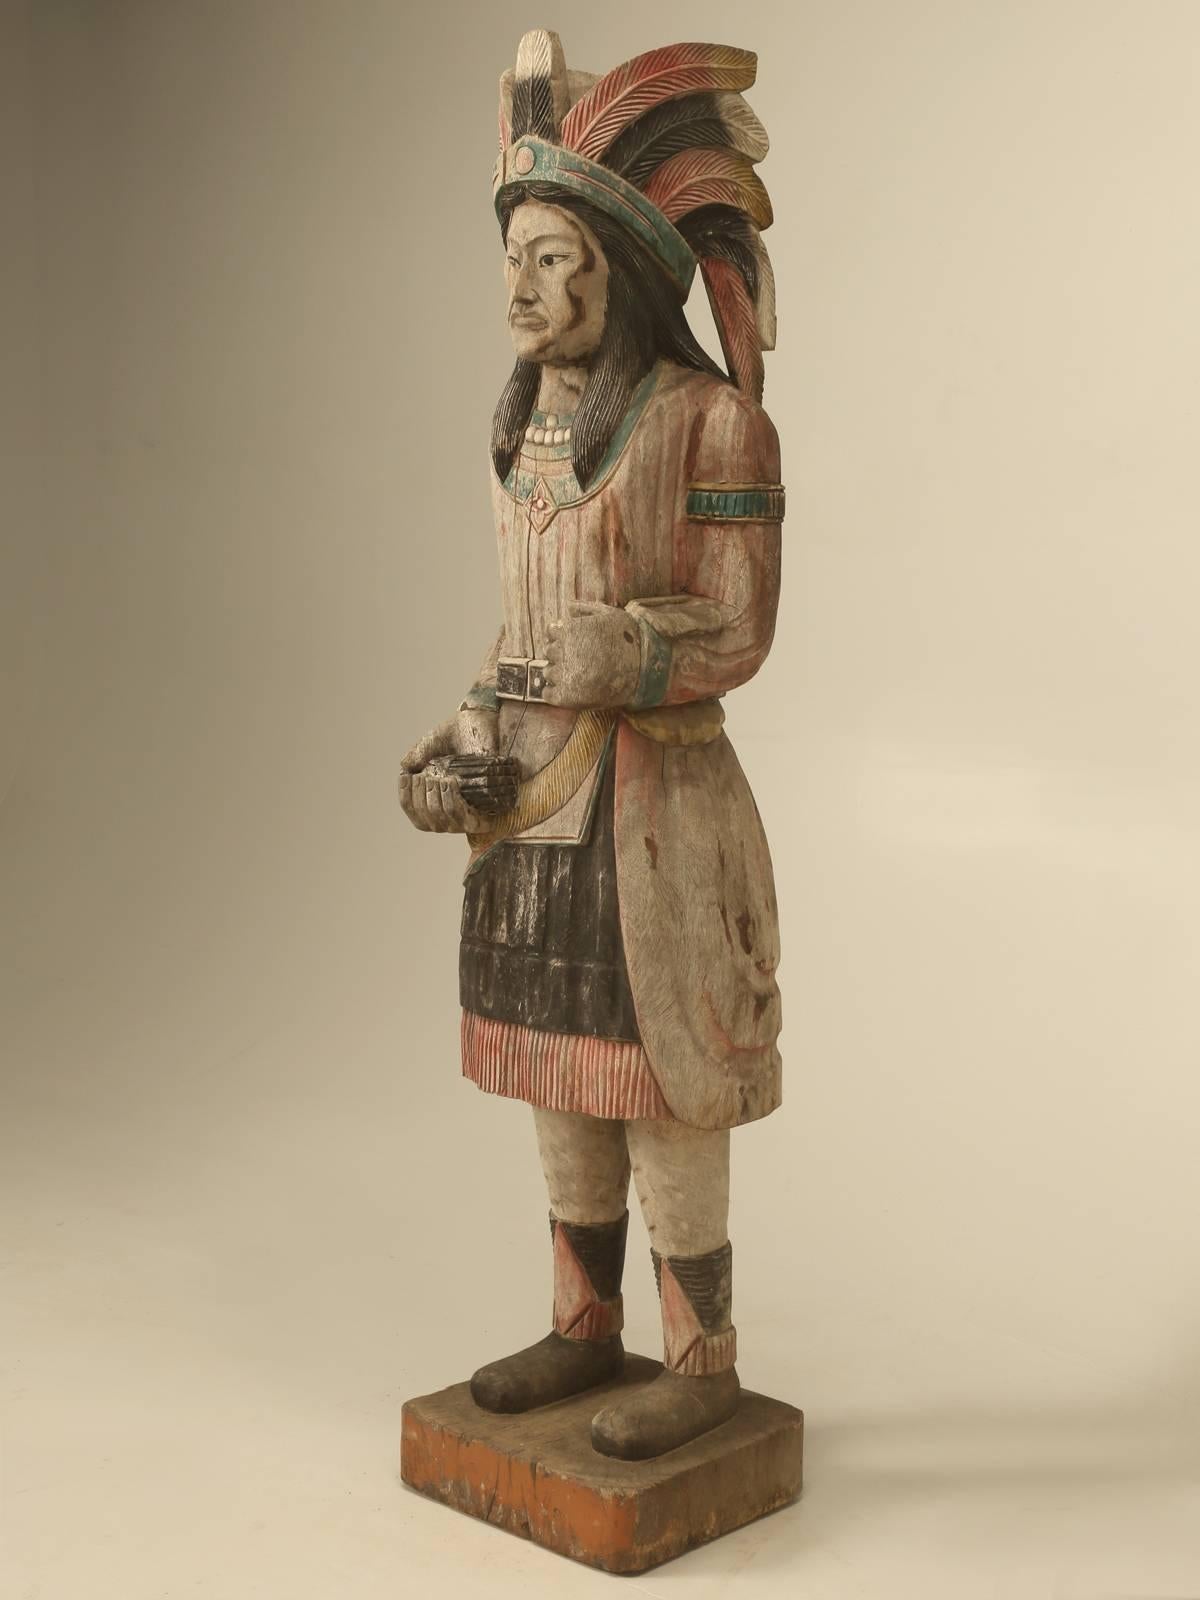 Our store is offering three cigar store Indians on 1stdibs and although they appear to look like turn-of-the-century, we think they are about 50 years old and in unrestored condition.
The Cigar Indians first appeared in the late 1600s in Europe and